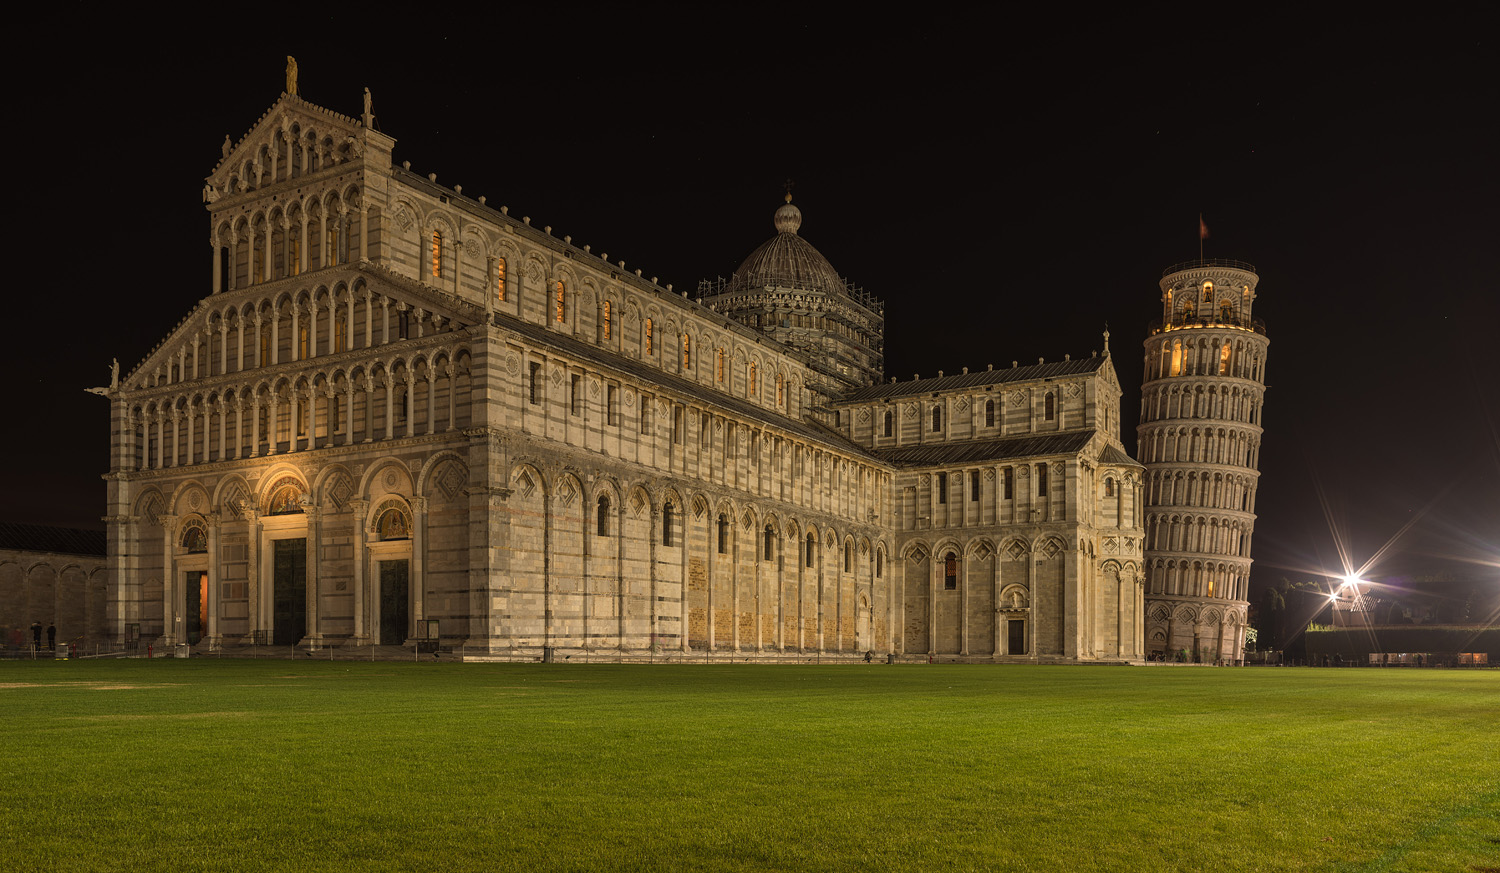 Cathedral and Leaning Tower at night